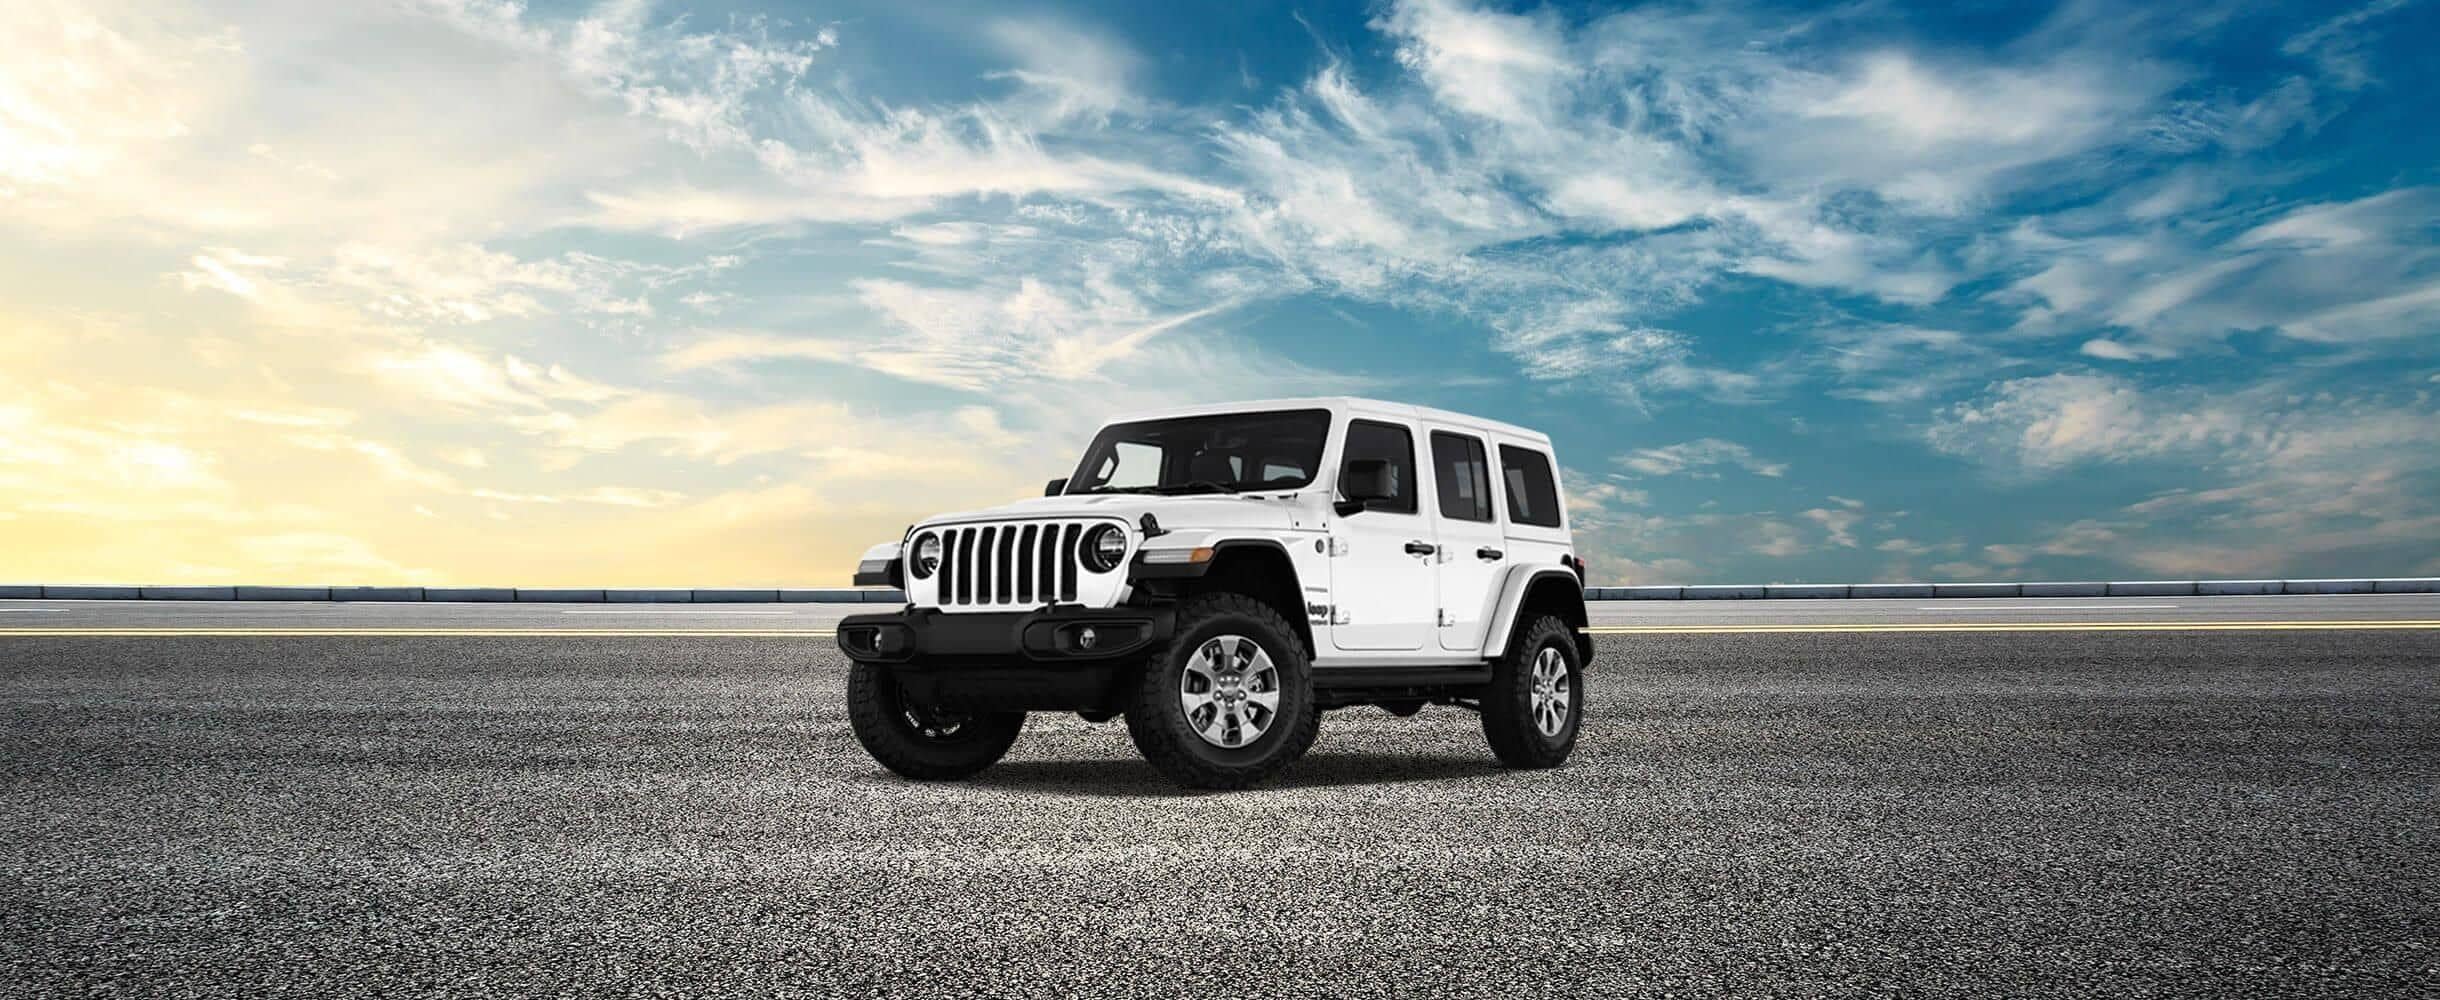 Rent a Jeep Wrangler in NYC | Avis Rent a Car